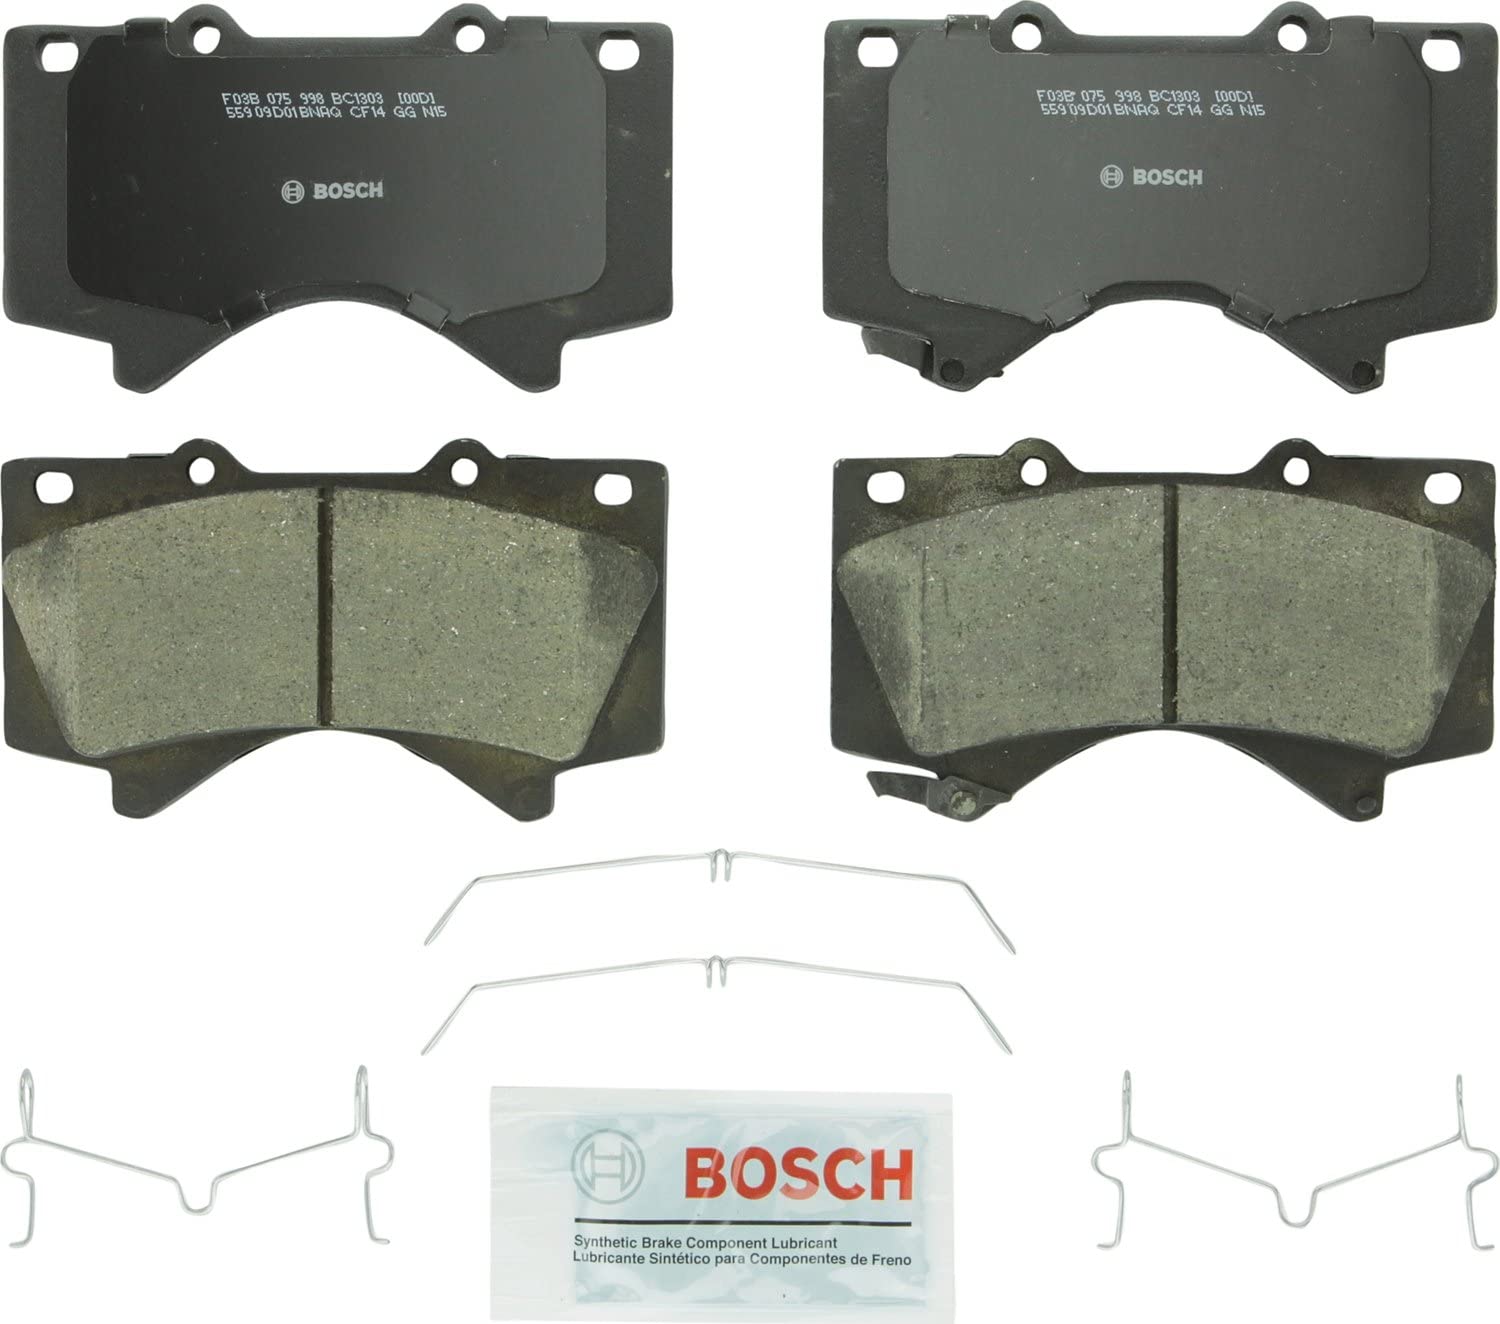 Hardware Kits Not Included 2015 fits Toyota Tundra TRD Pro Front Ceramic Brake Pads with Two Years Manufacturer Warranty DNA